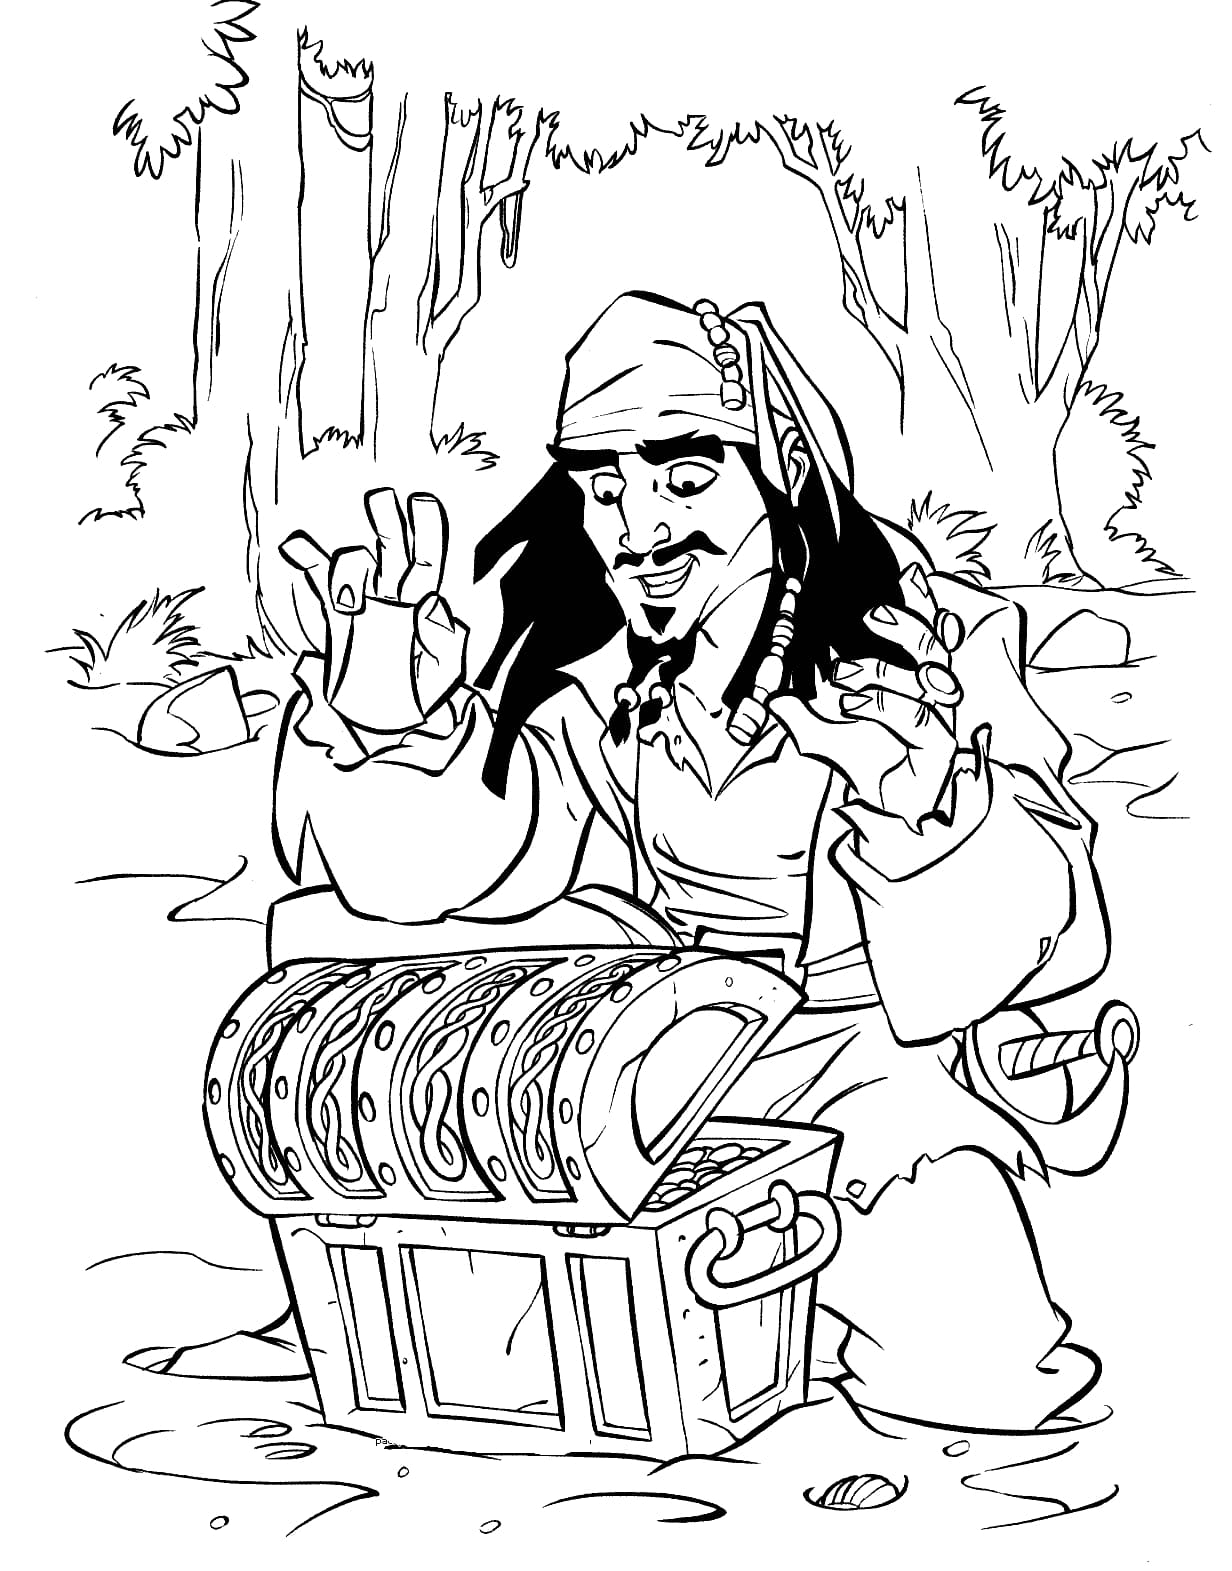 Pirates of the Caribbean coloring page